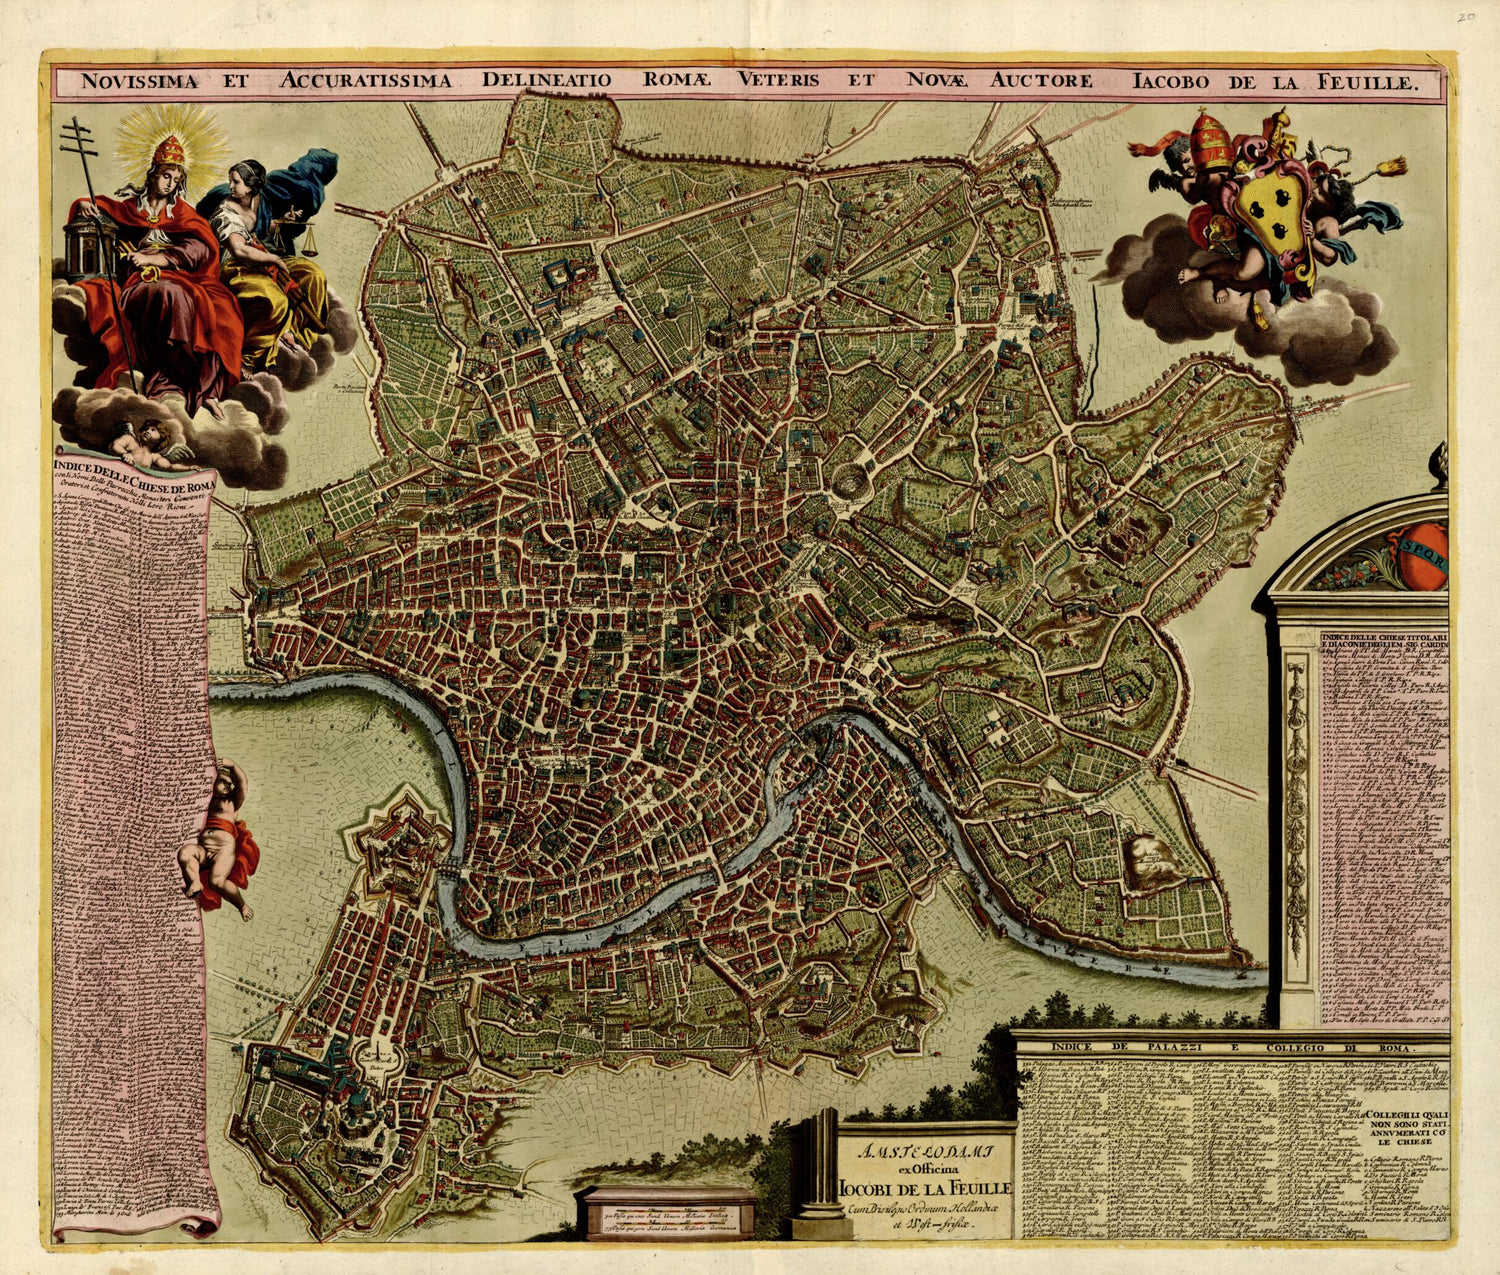 This old map of Novissima Et Accuratissima Delineatio Romae from a Collection of Plans of Fortifications and Battles, 1684-from 1709 from 1709 was created by Anna Beeck in 1709